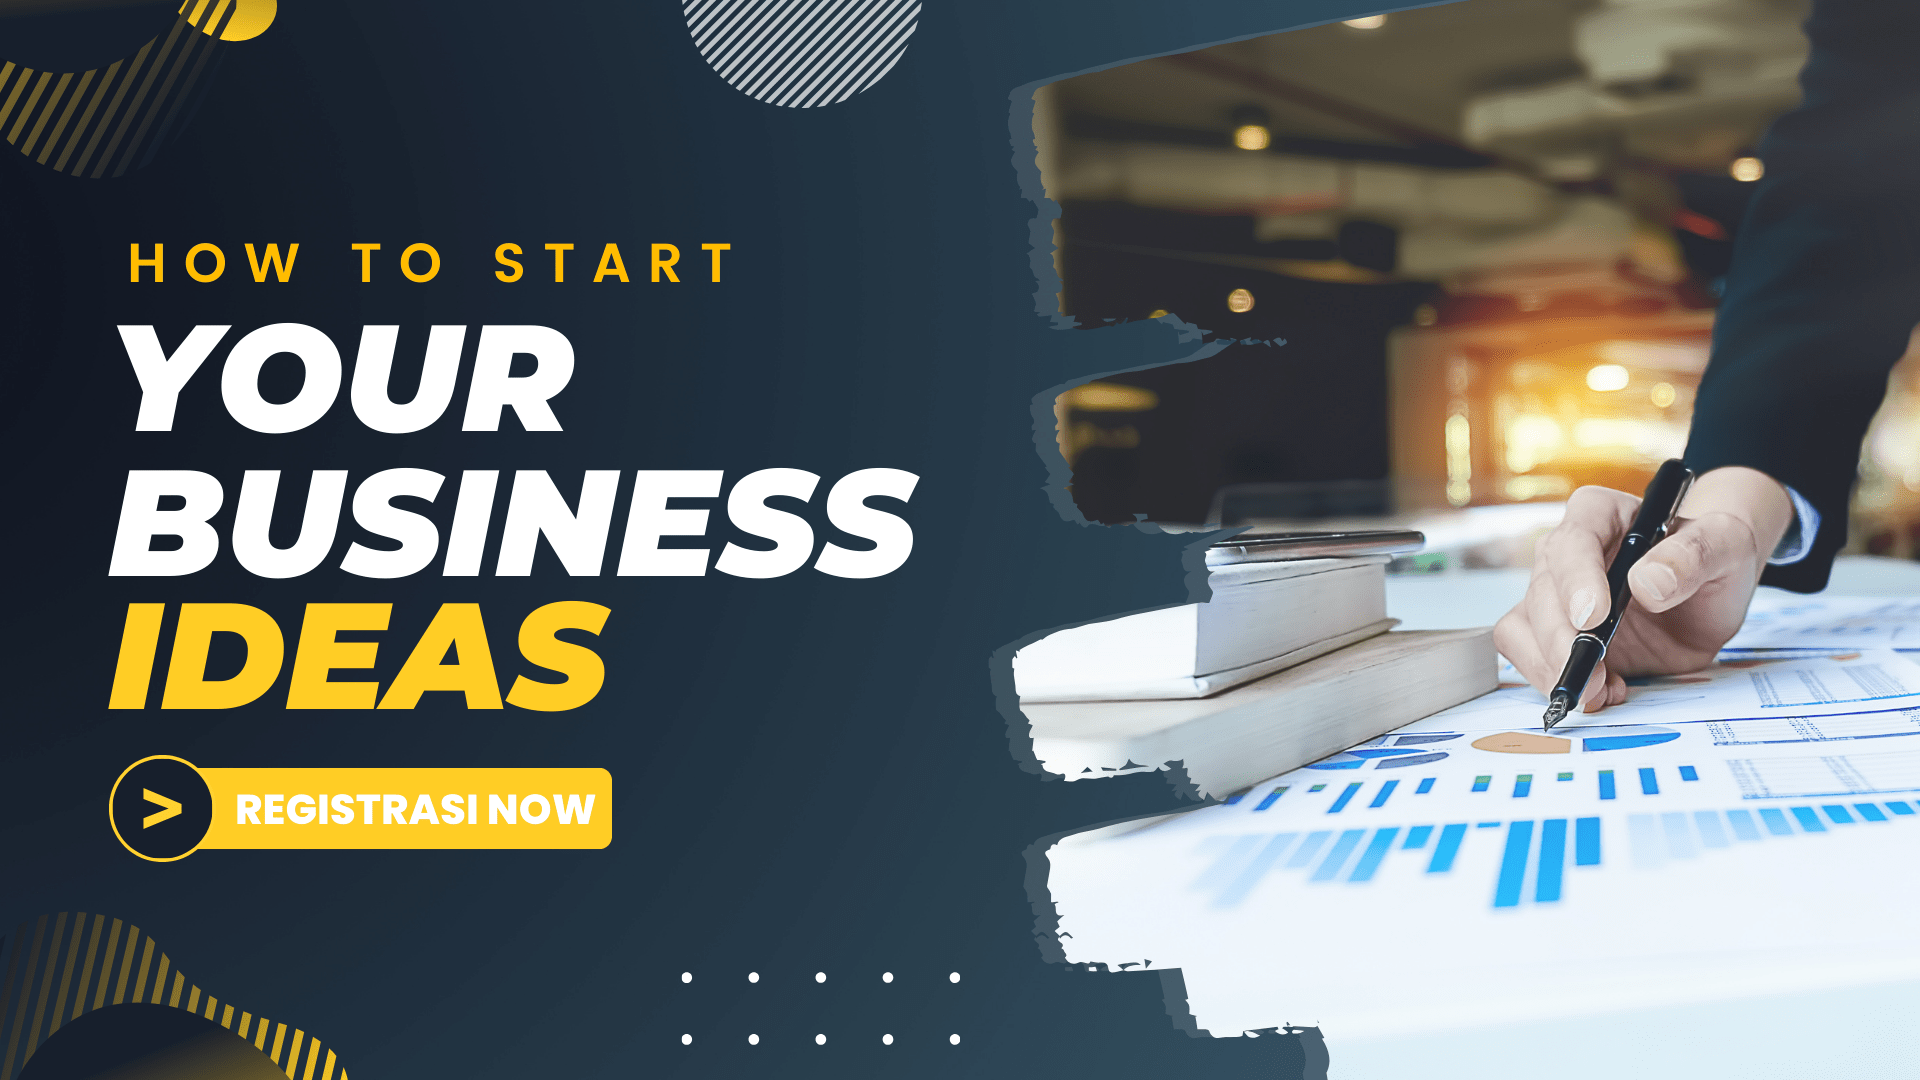 HOW START YOUR BUSINESS